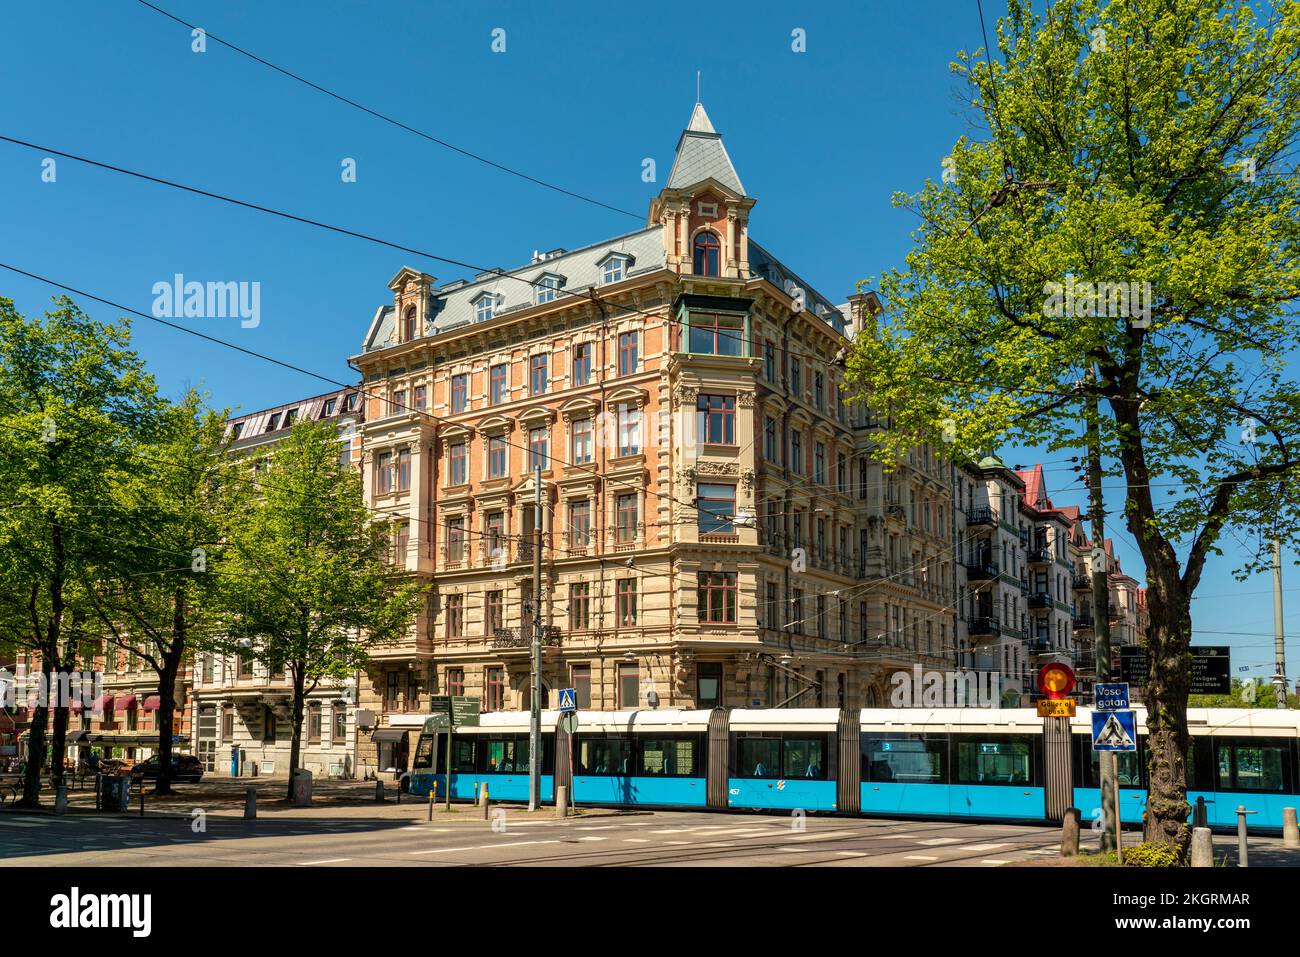 Sweden, Vastra Gotaland County, Gothenburg, Cable car passing in front of Gothenburg University Stock Photo